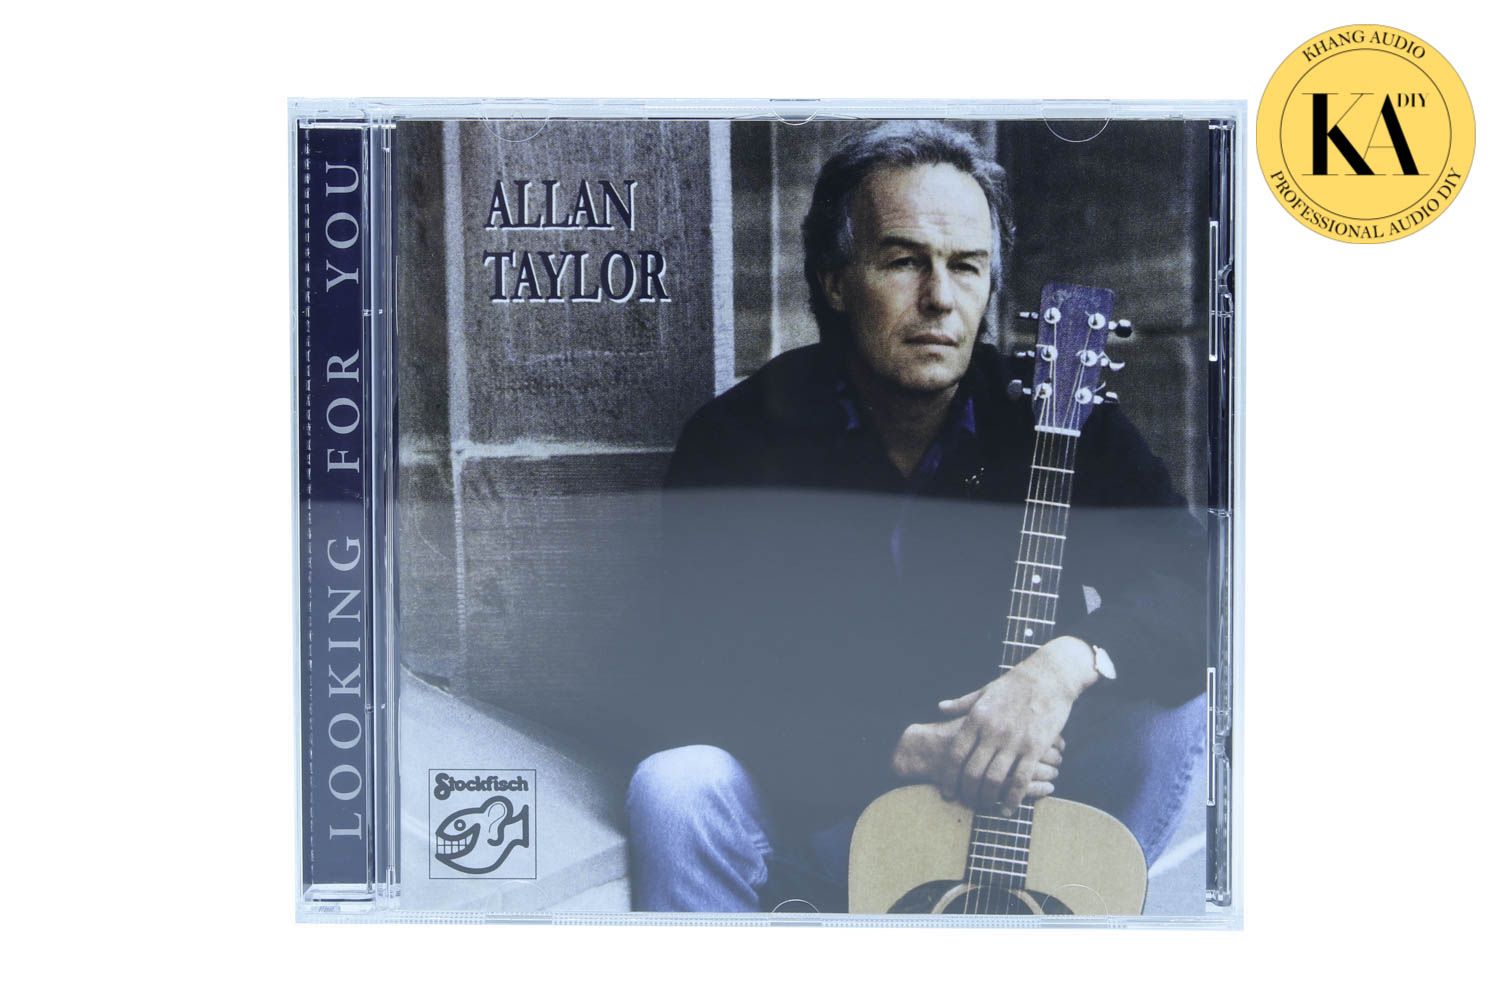 Looking For You - Allan Taylor